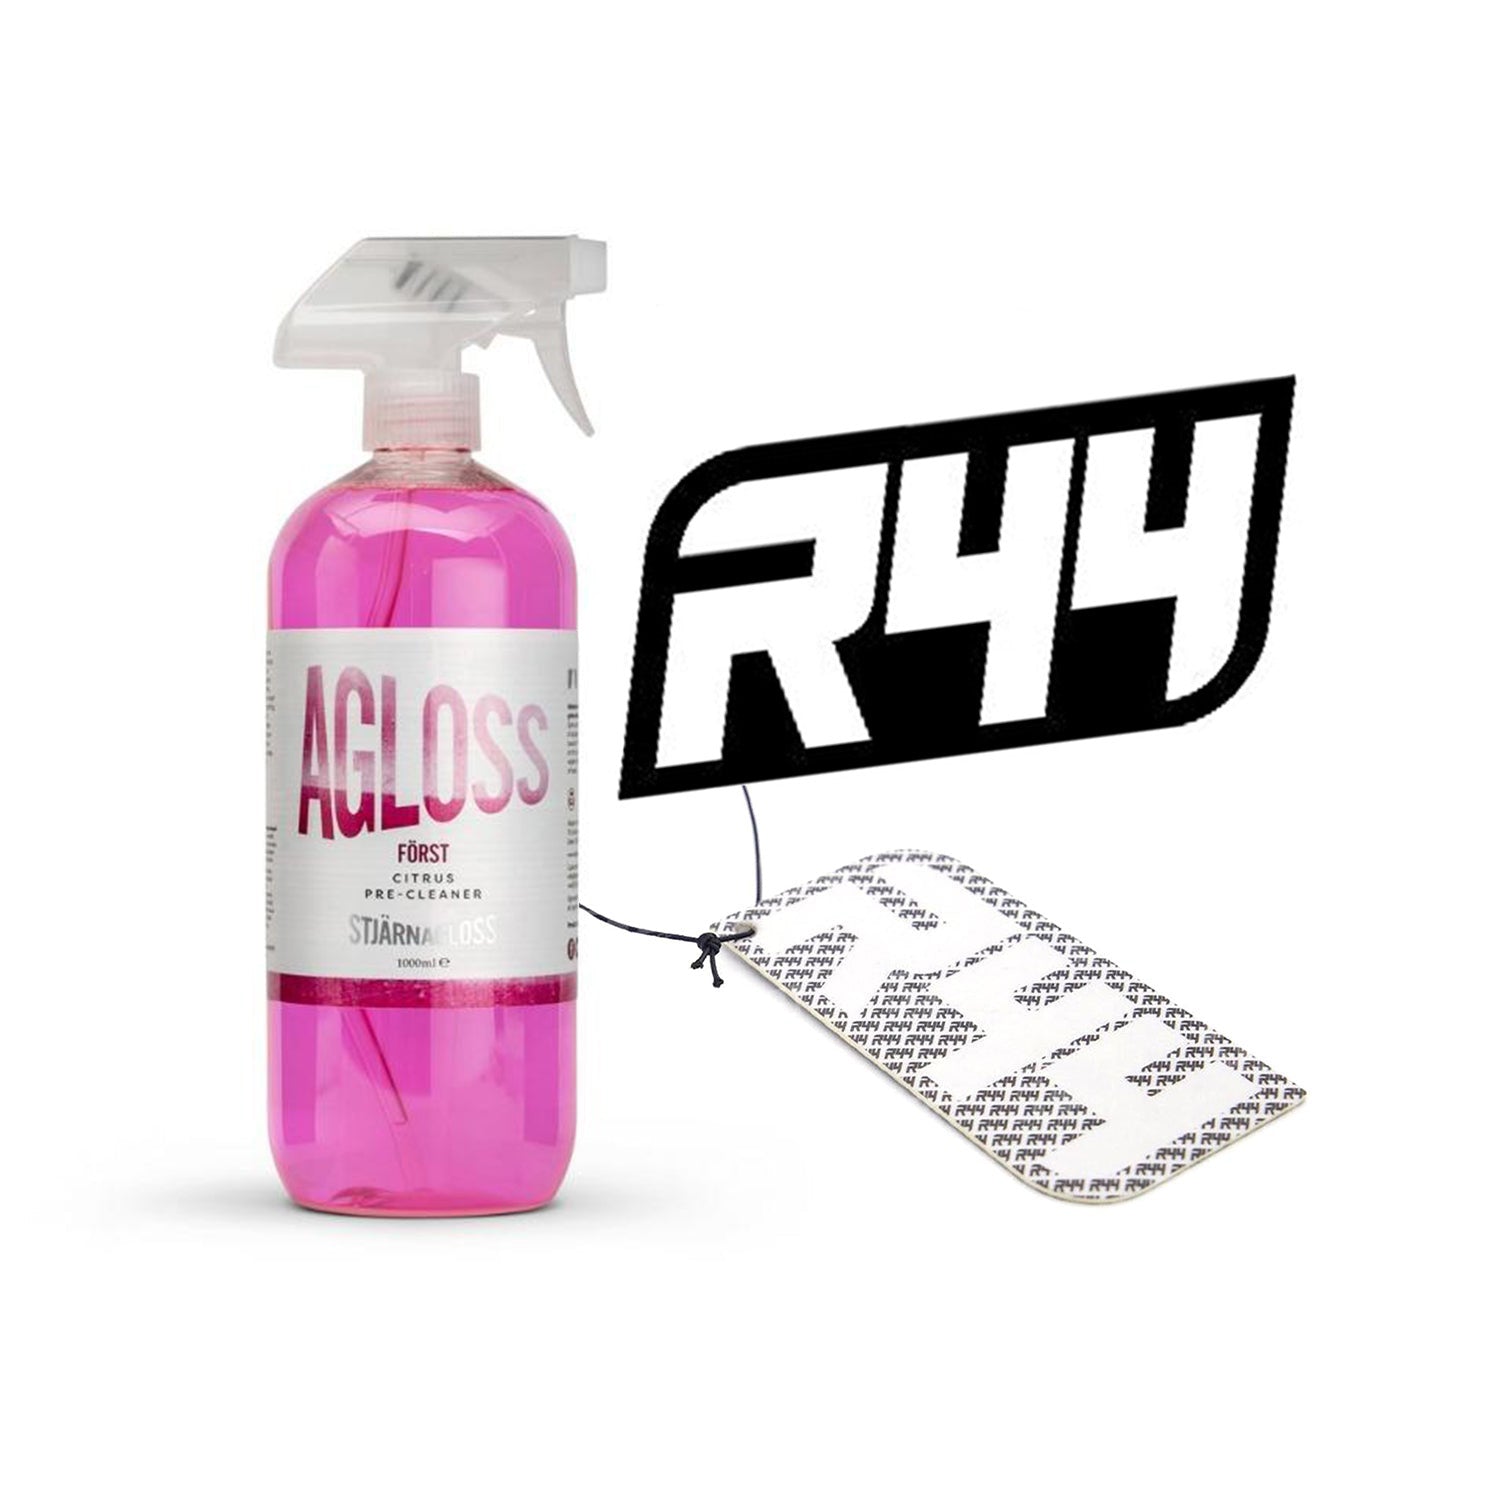 R44 Detailing Gift Pack with Air Freshener & Sticker-R44 Performance